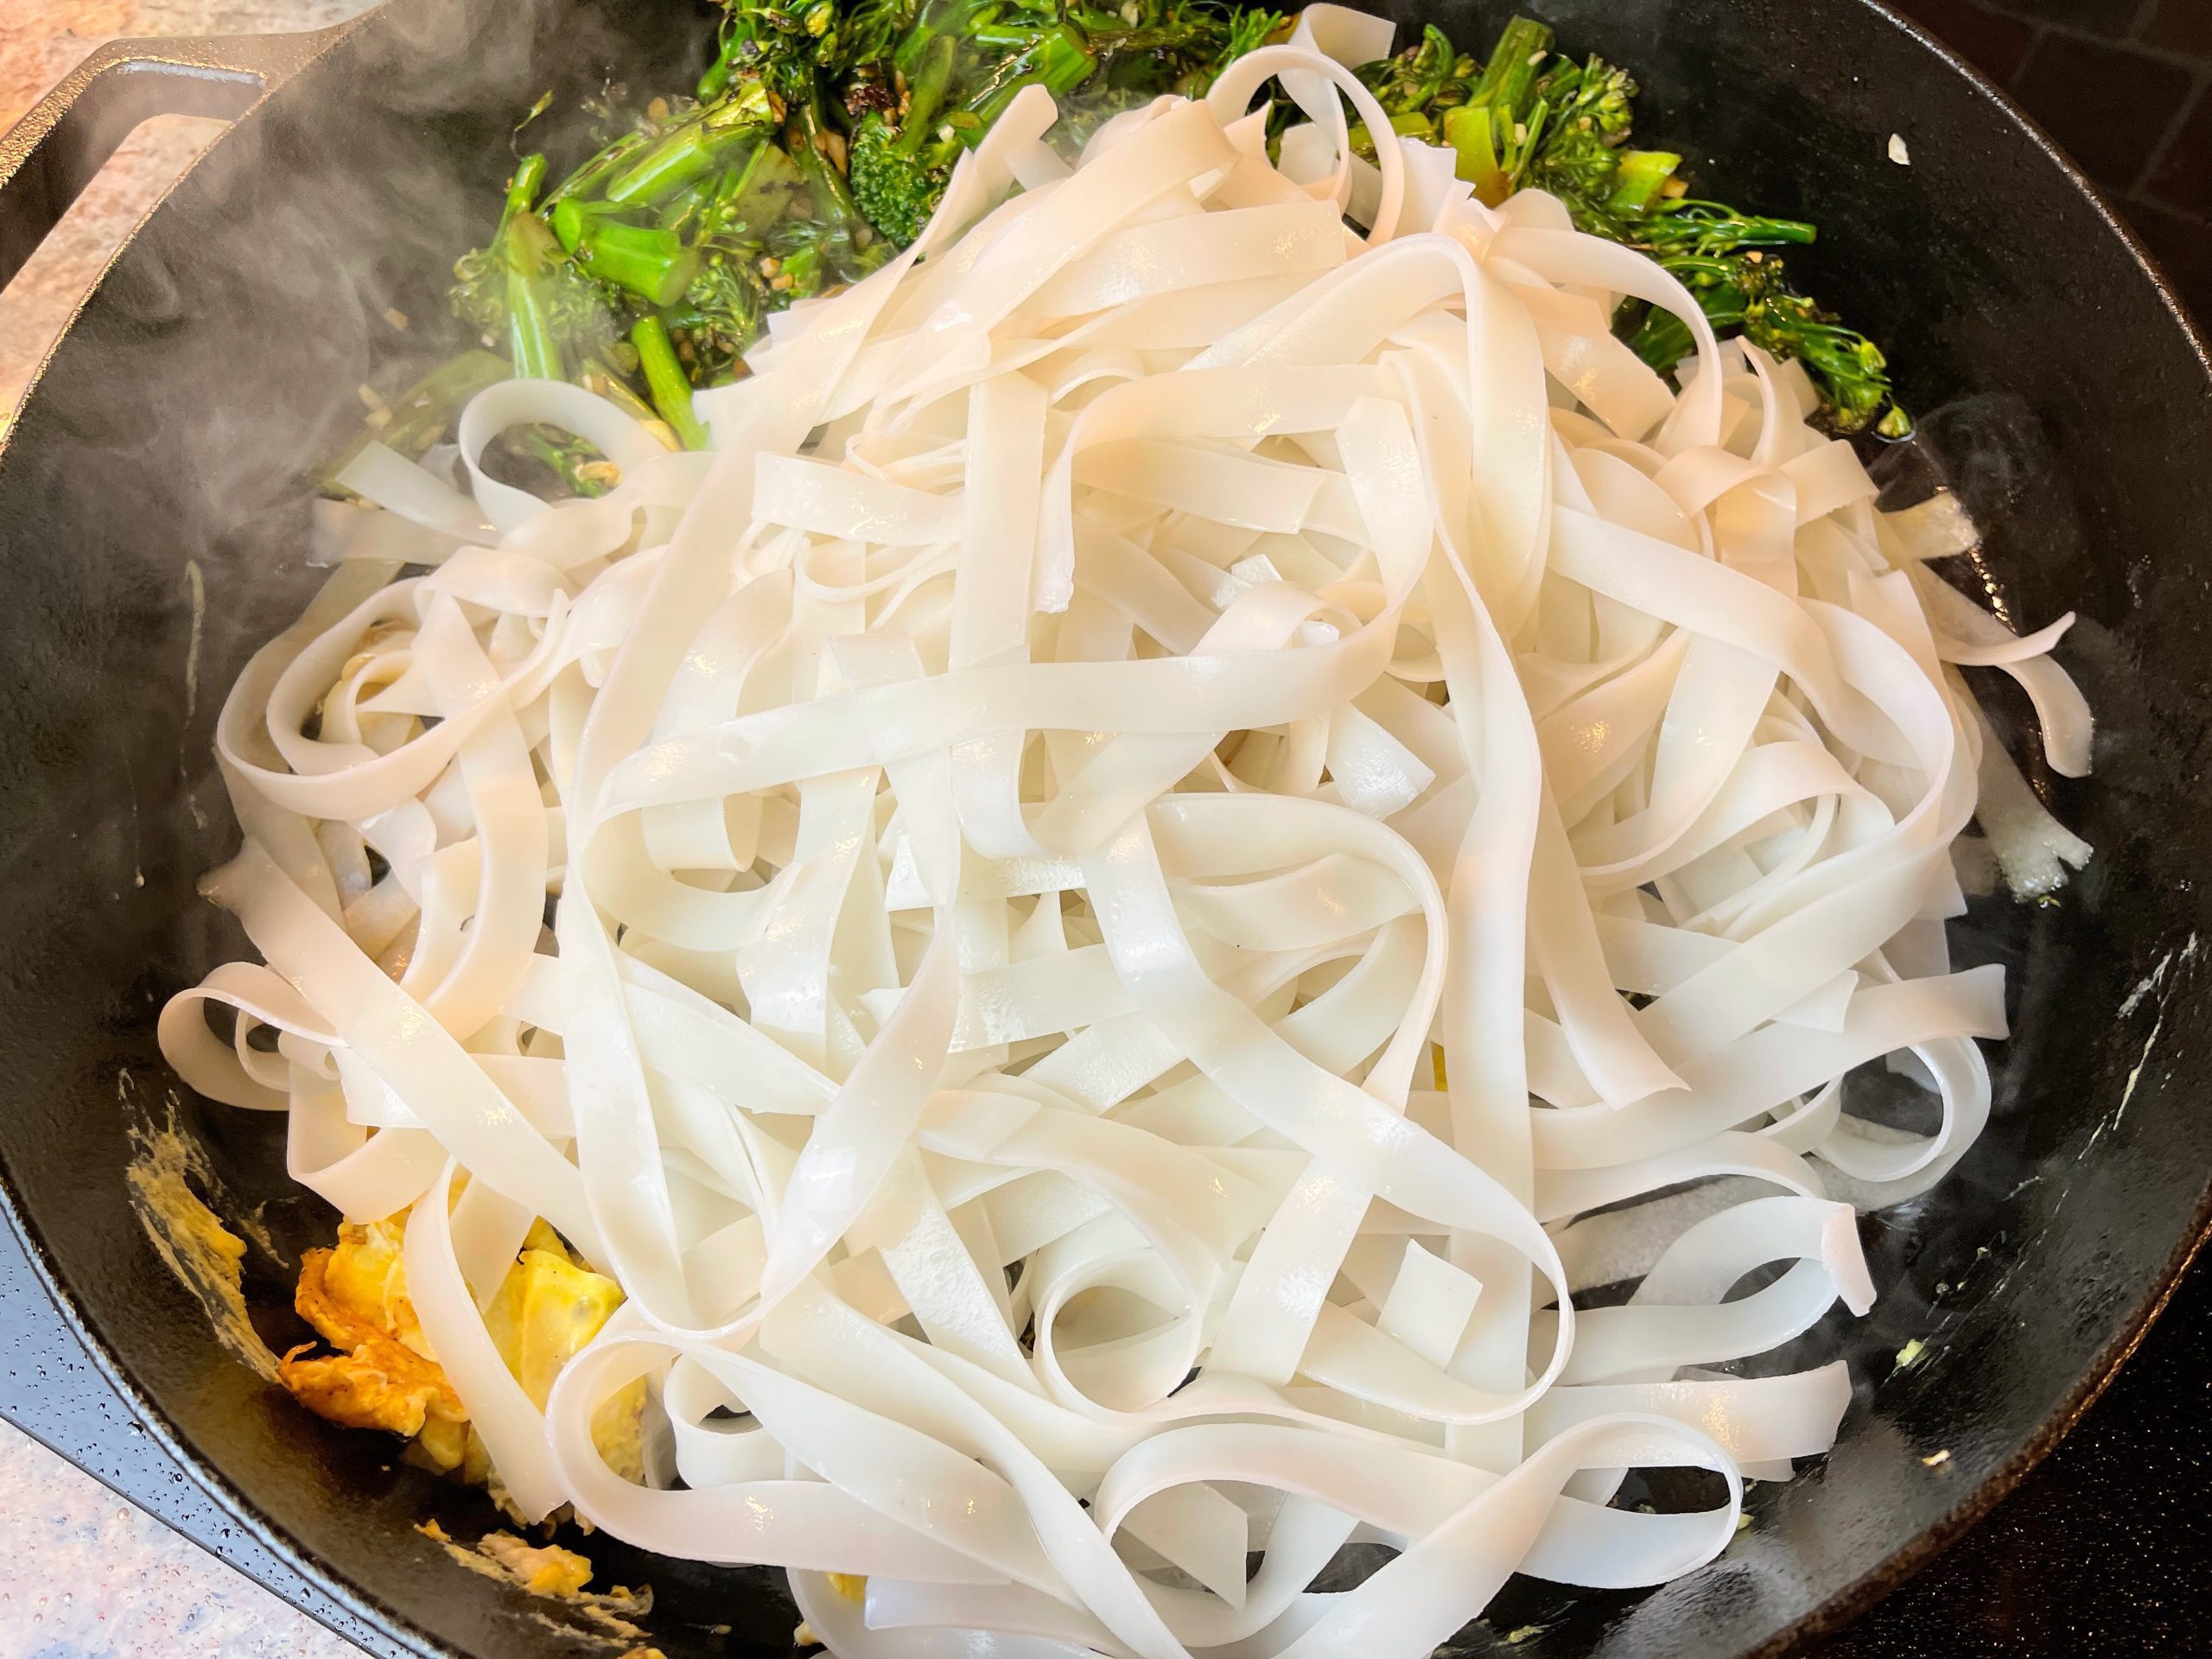 Add noodles to the pan and combine them with the egg and broccolini using tongs.